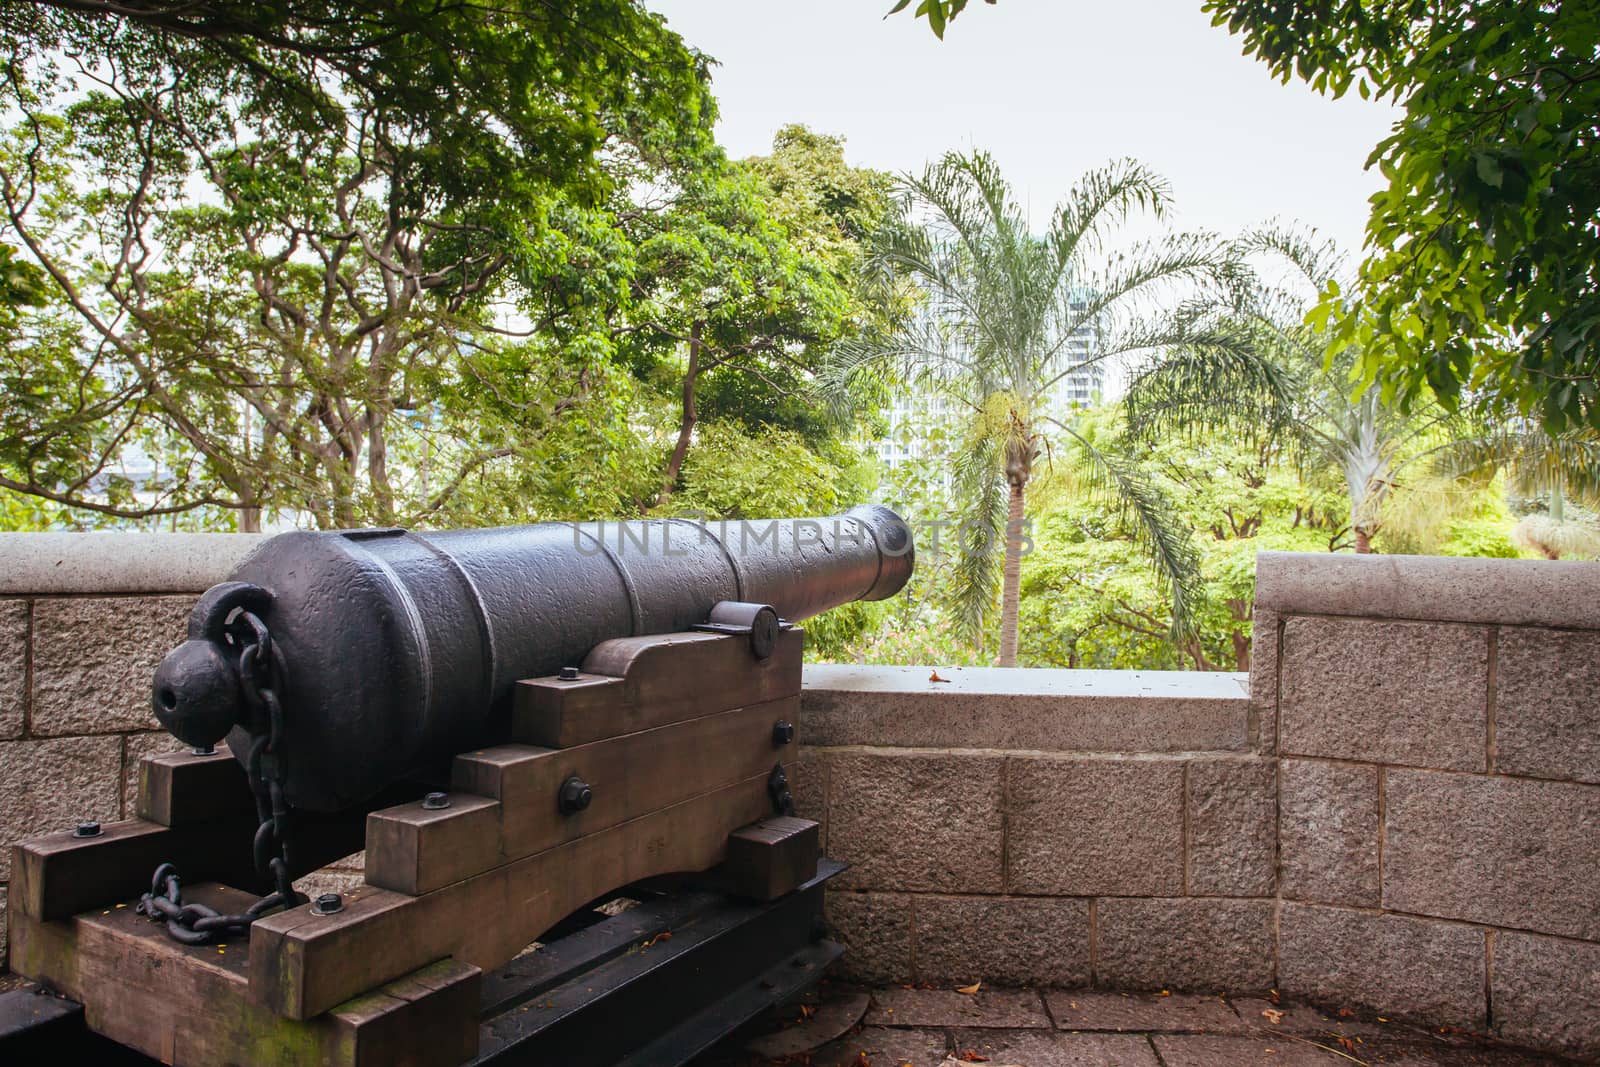 The surrounds of Fort Canning Park in Singapore City on a warm humid morning.